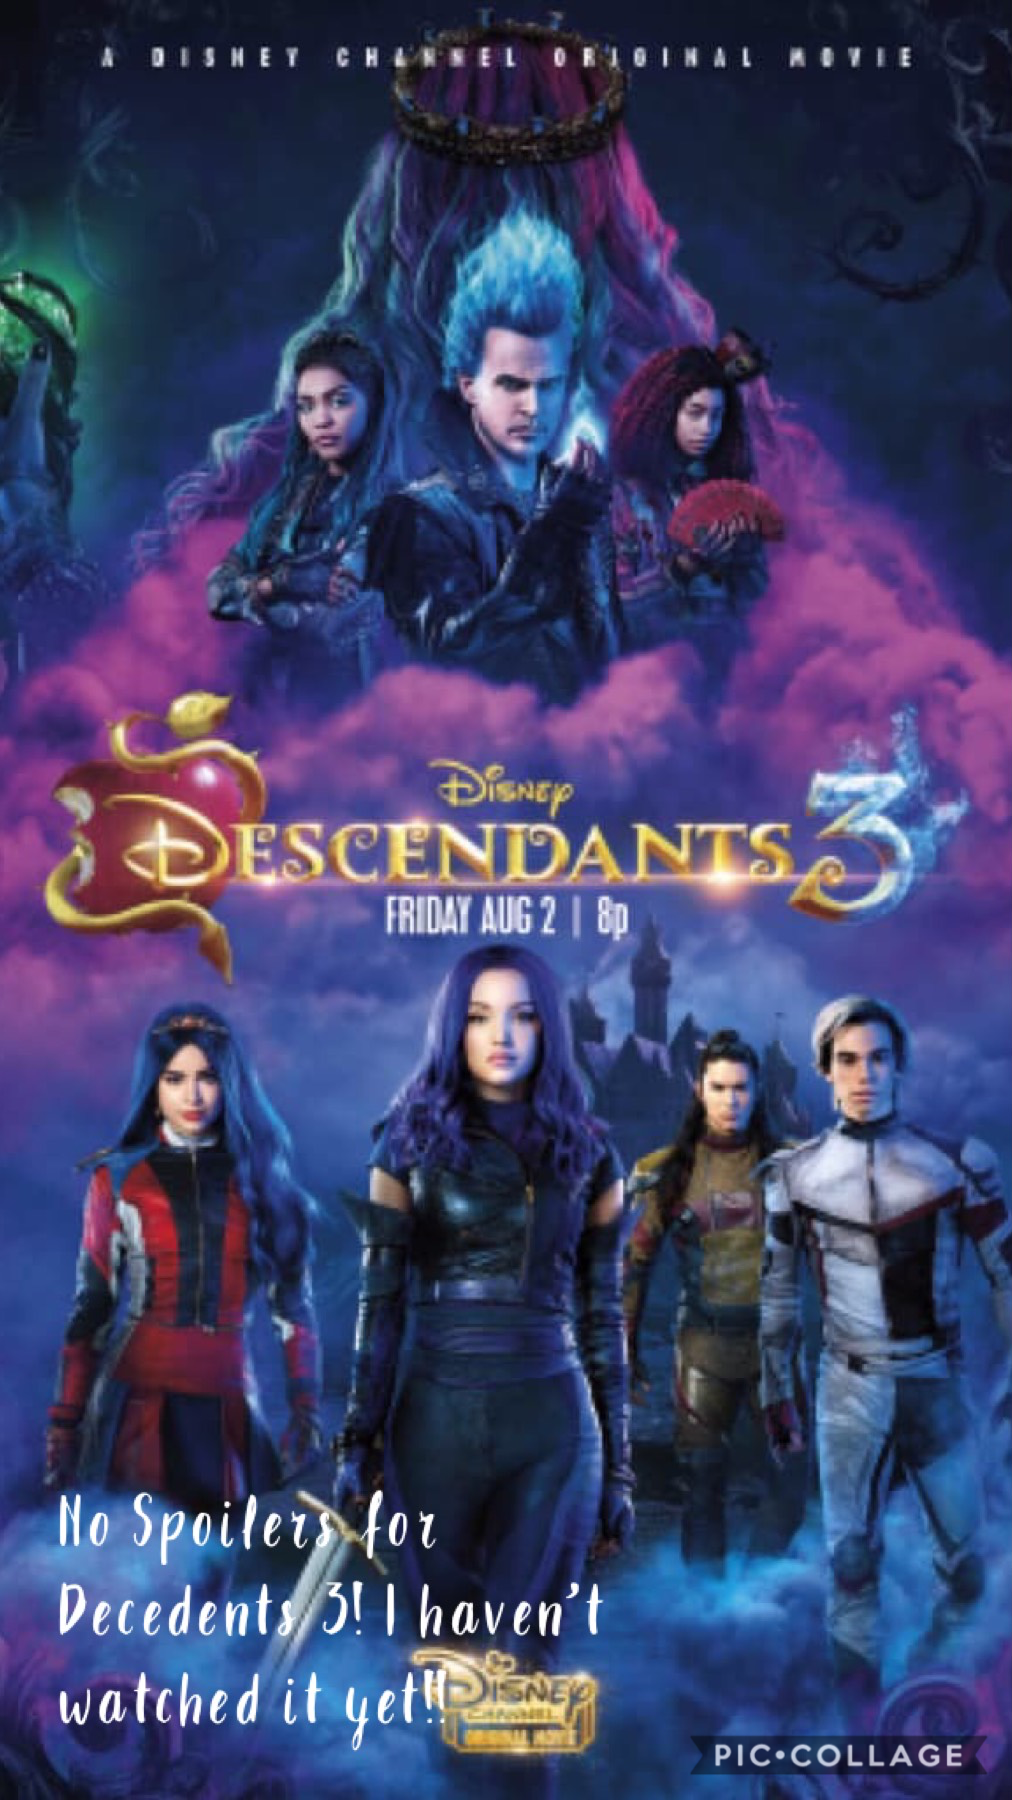 No Spoilers for Decedents 3! I haven’t watched it yet!!